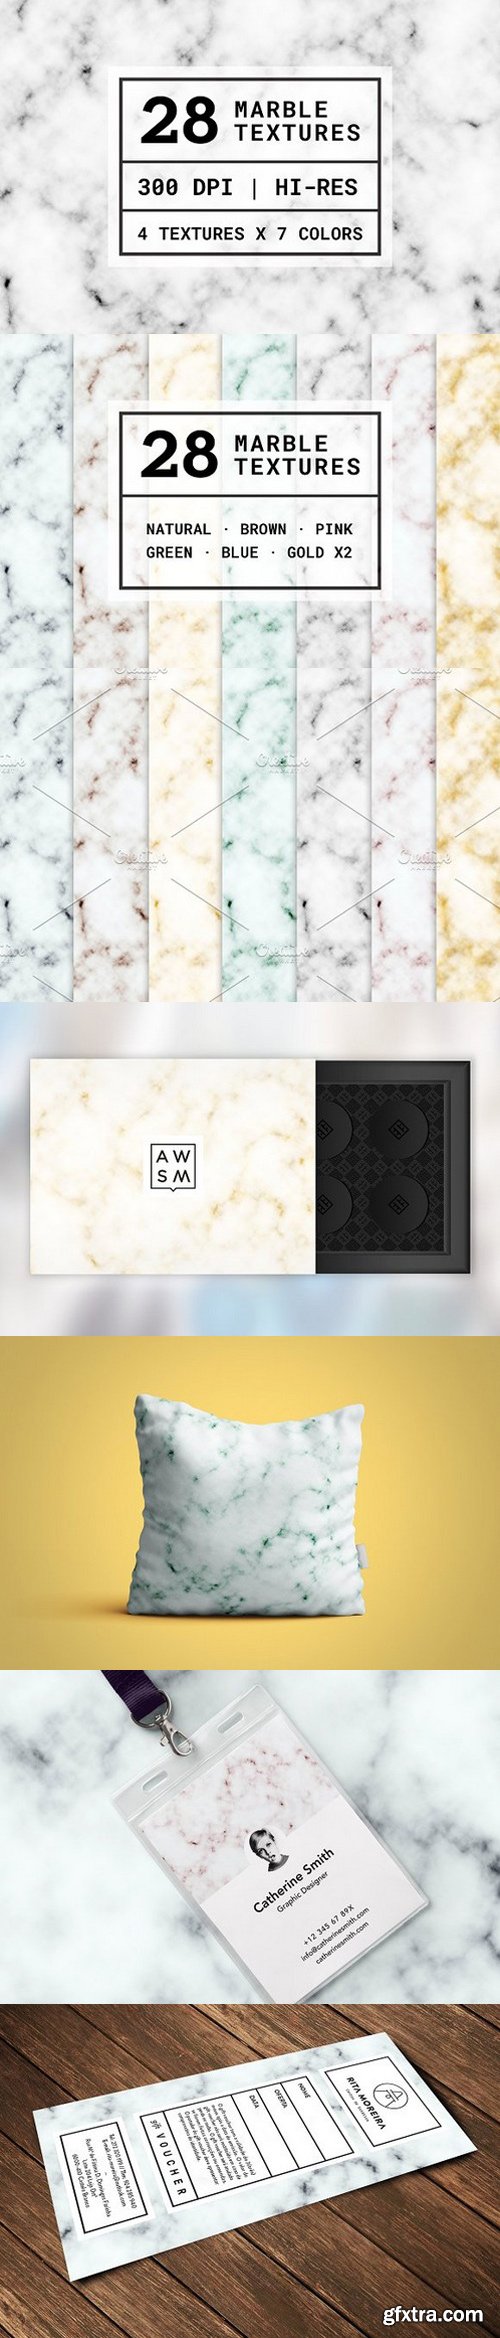 CM - The AWSM Marble Textures Collection 1437631